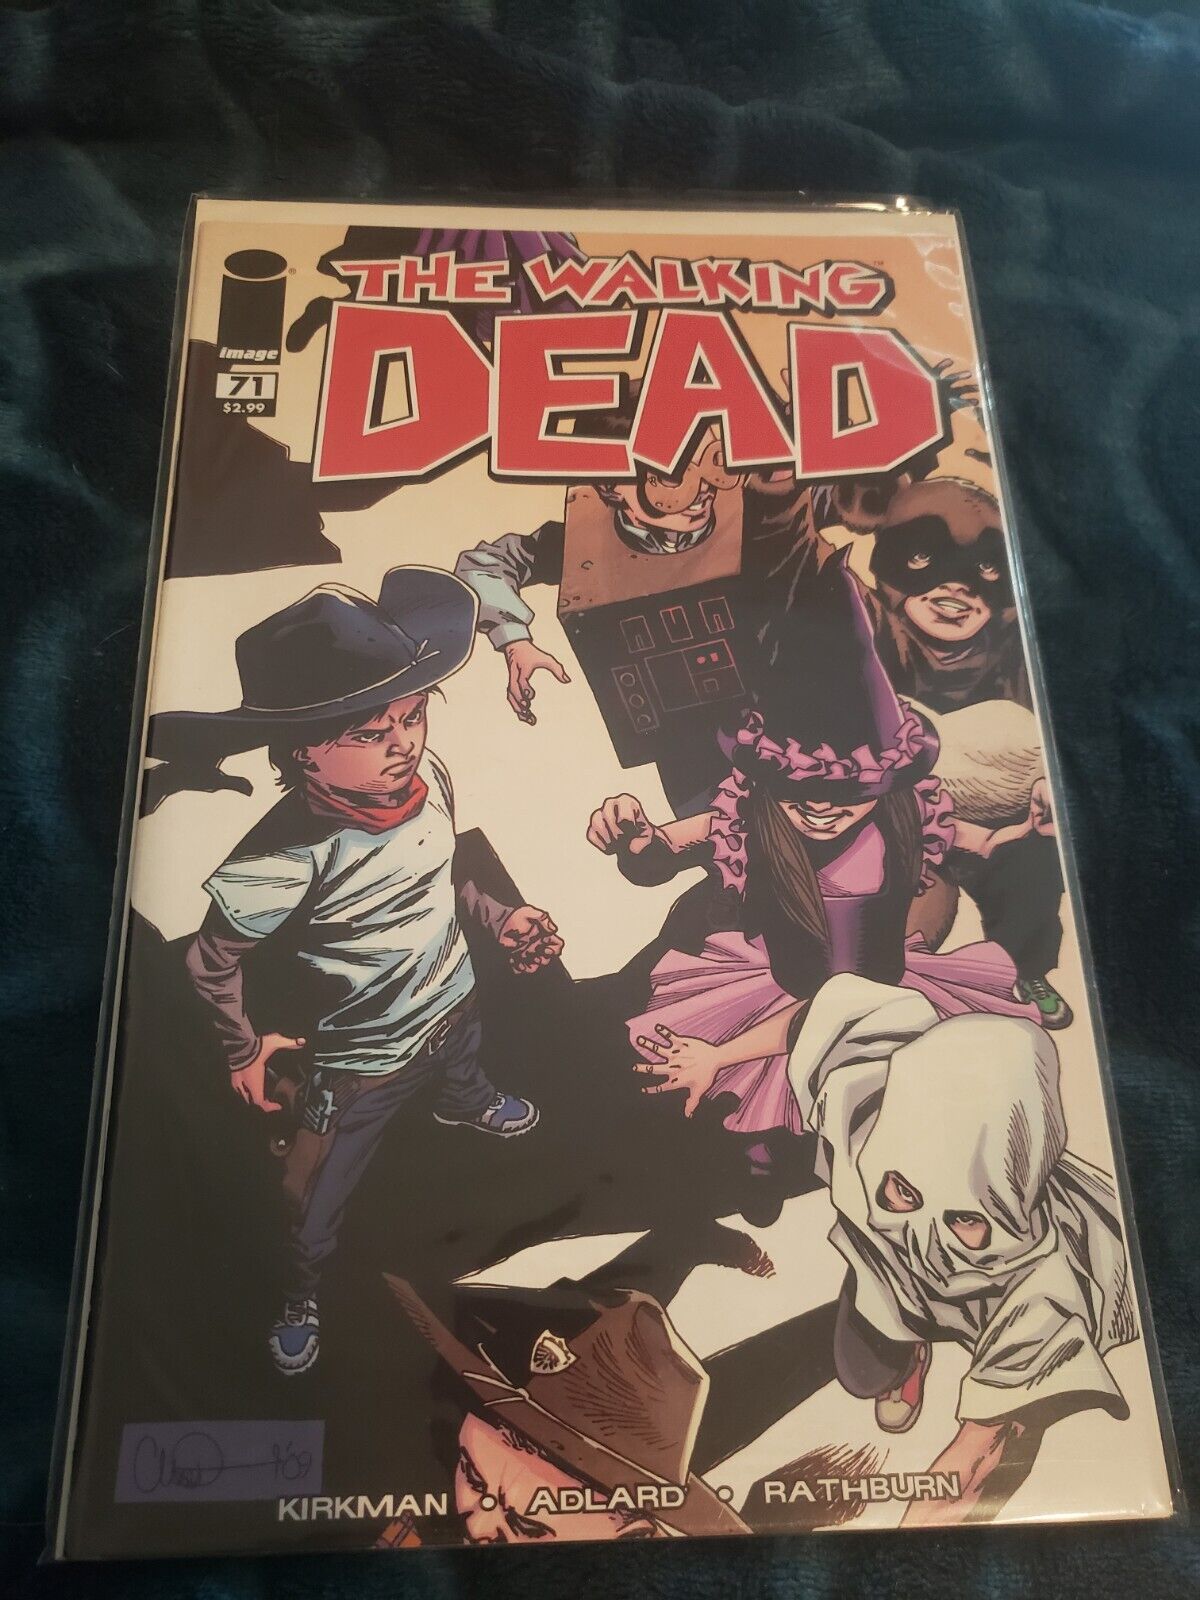 The Walking Dead Issue 71-72 Comic Book Lot